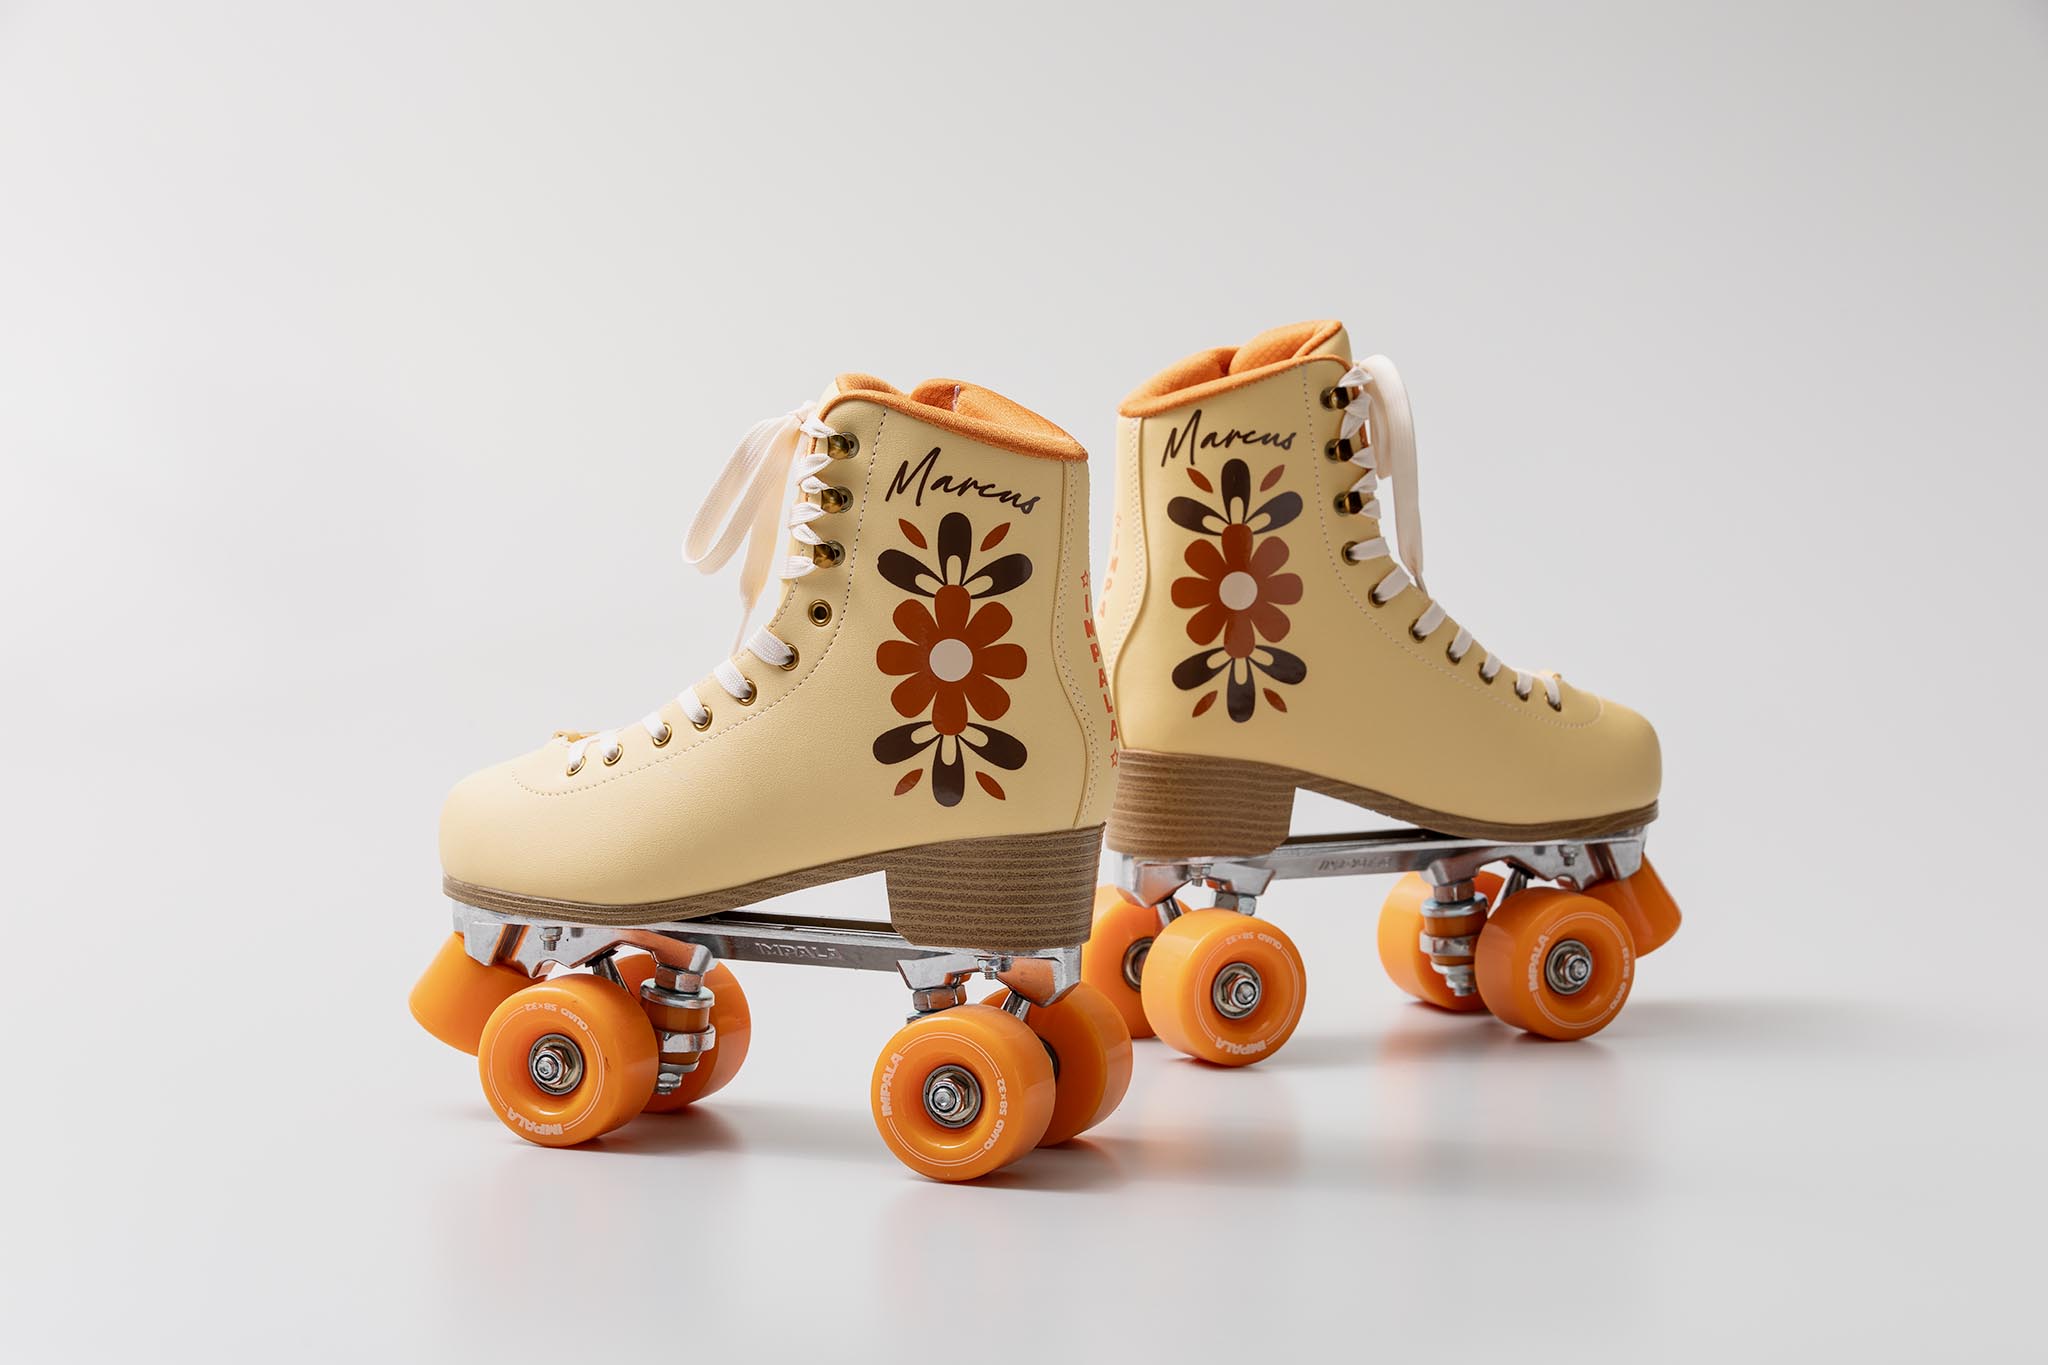 Groovy 70s retro personalized roller skates for wedding photos